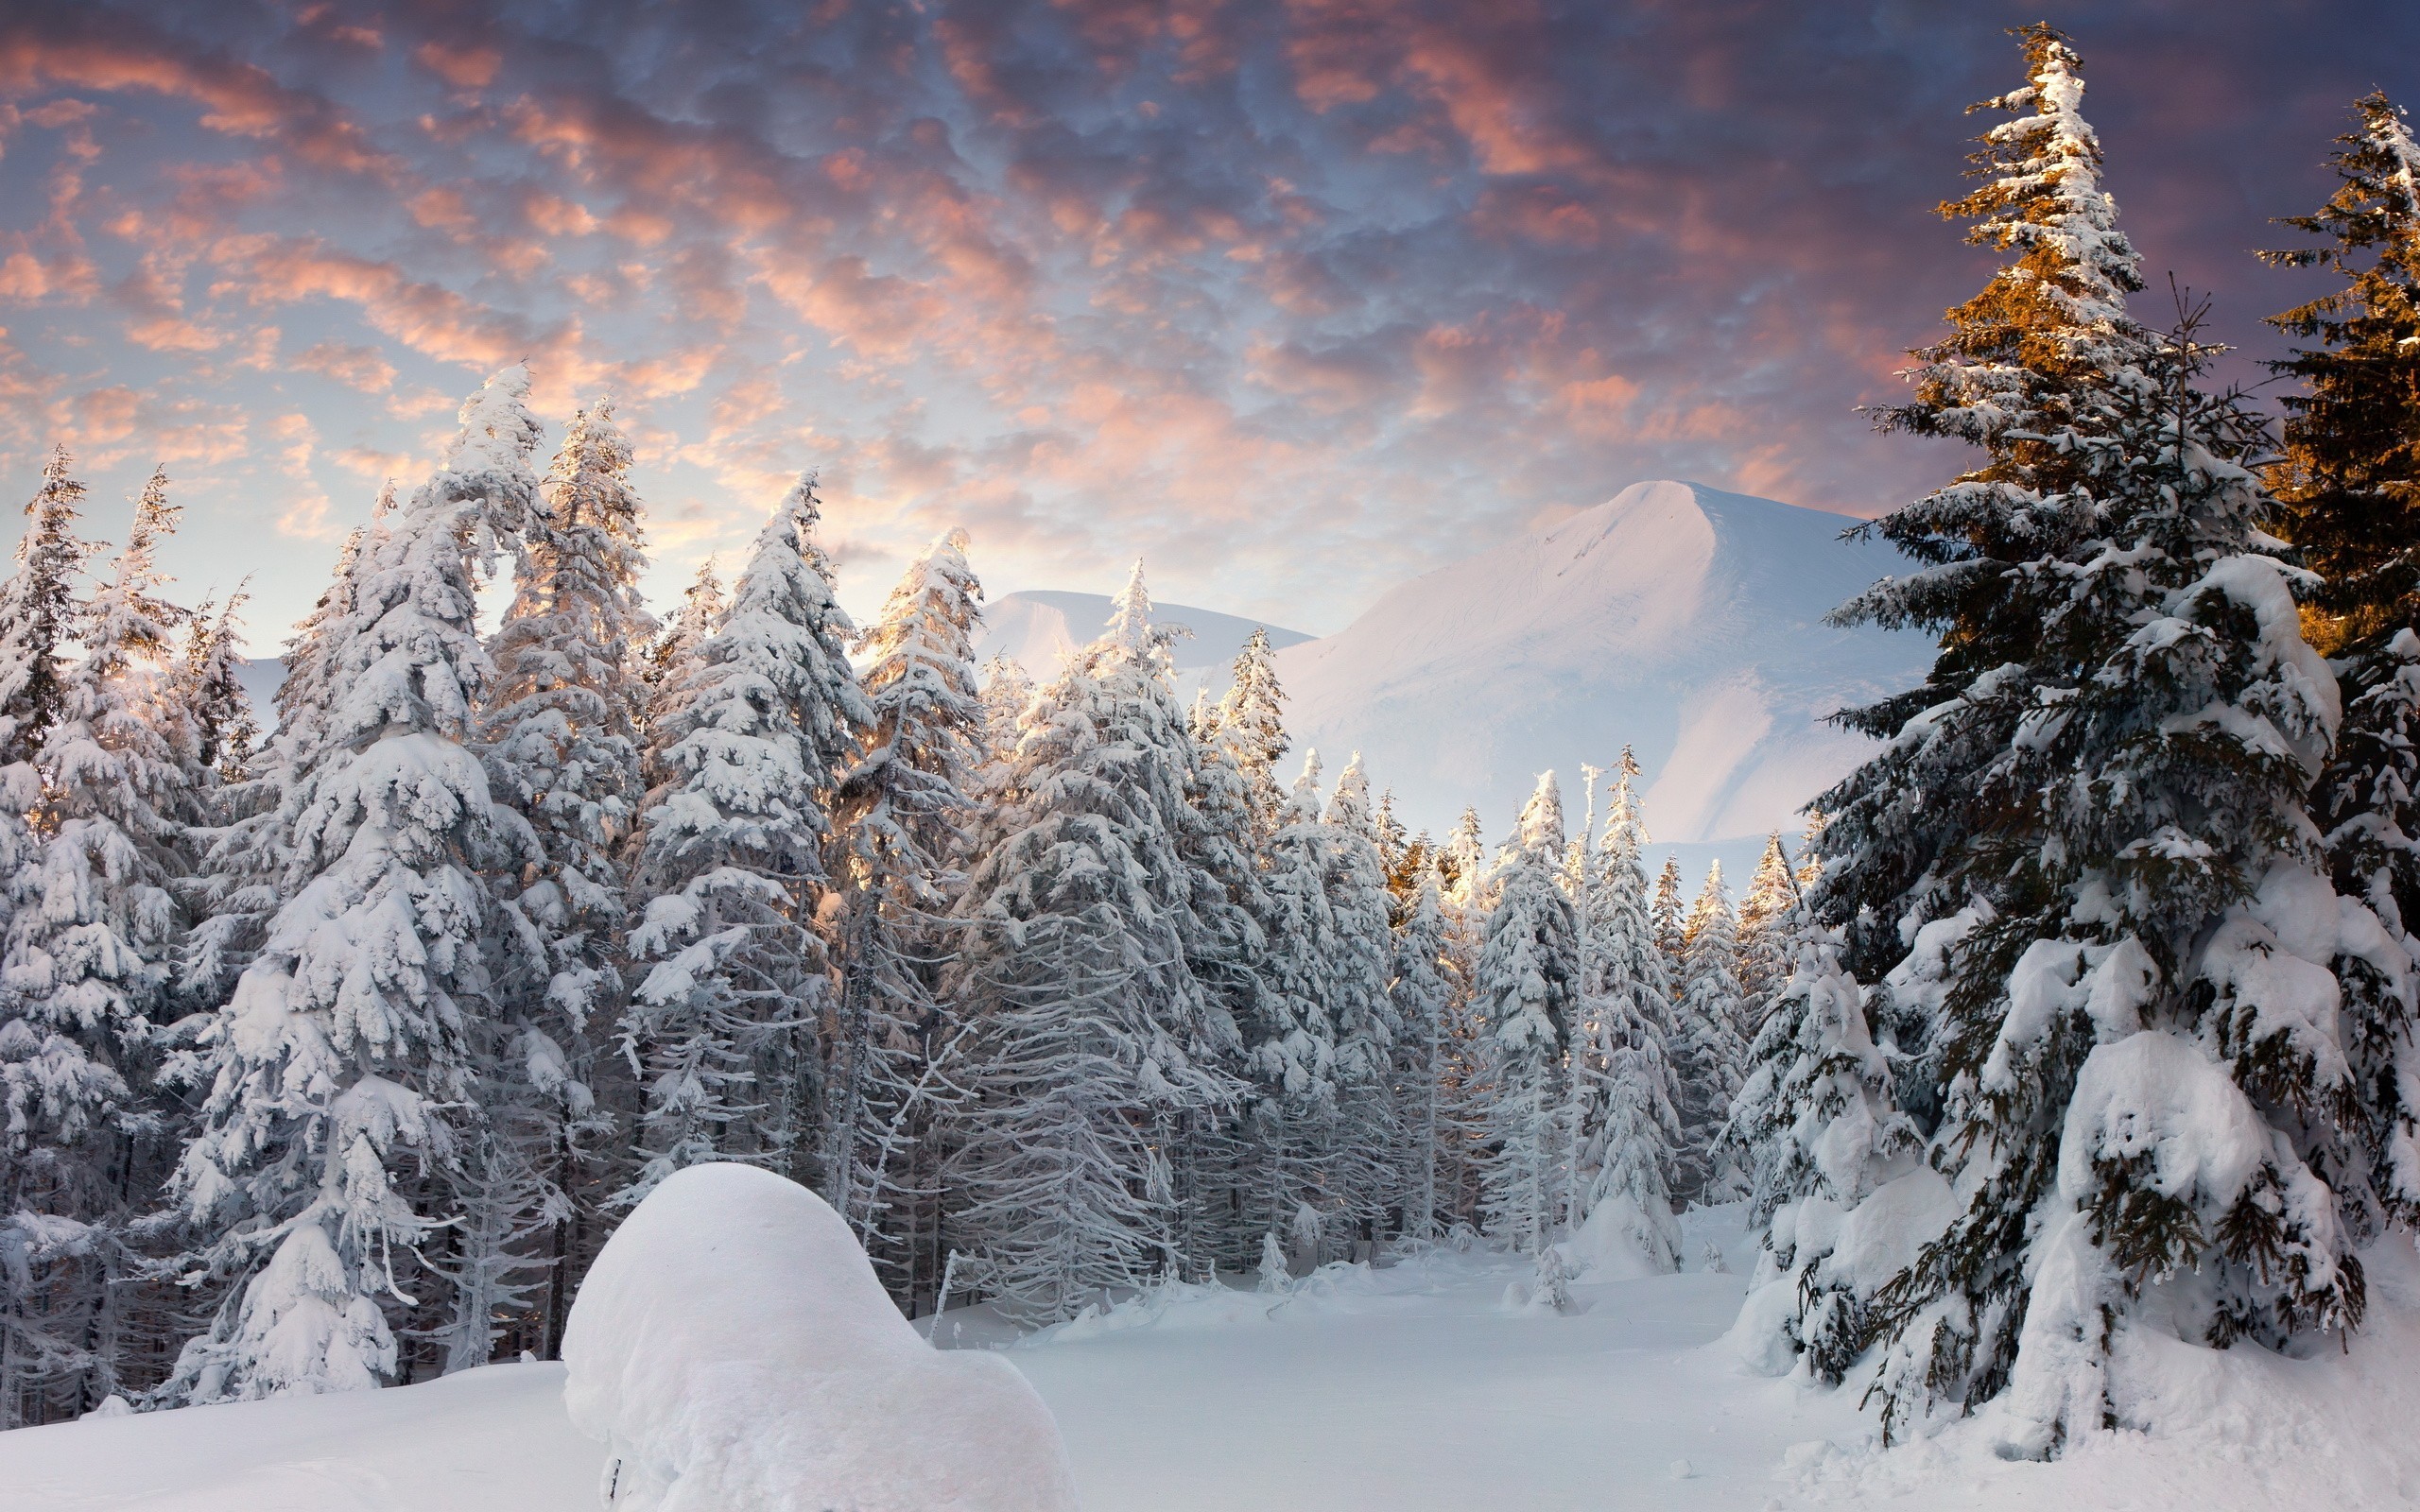 General 2560x1600 nature snow forest trees clouds winter cold ice